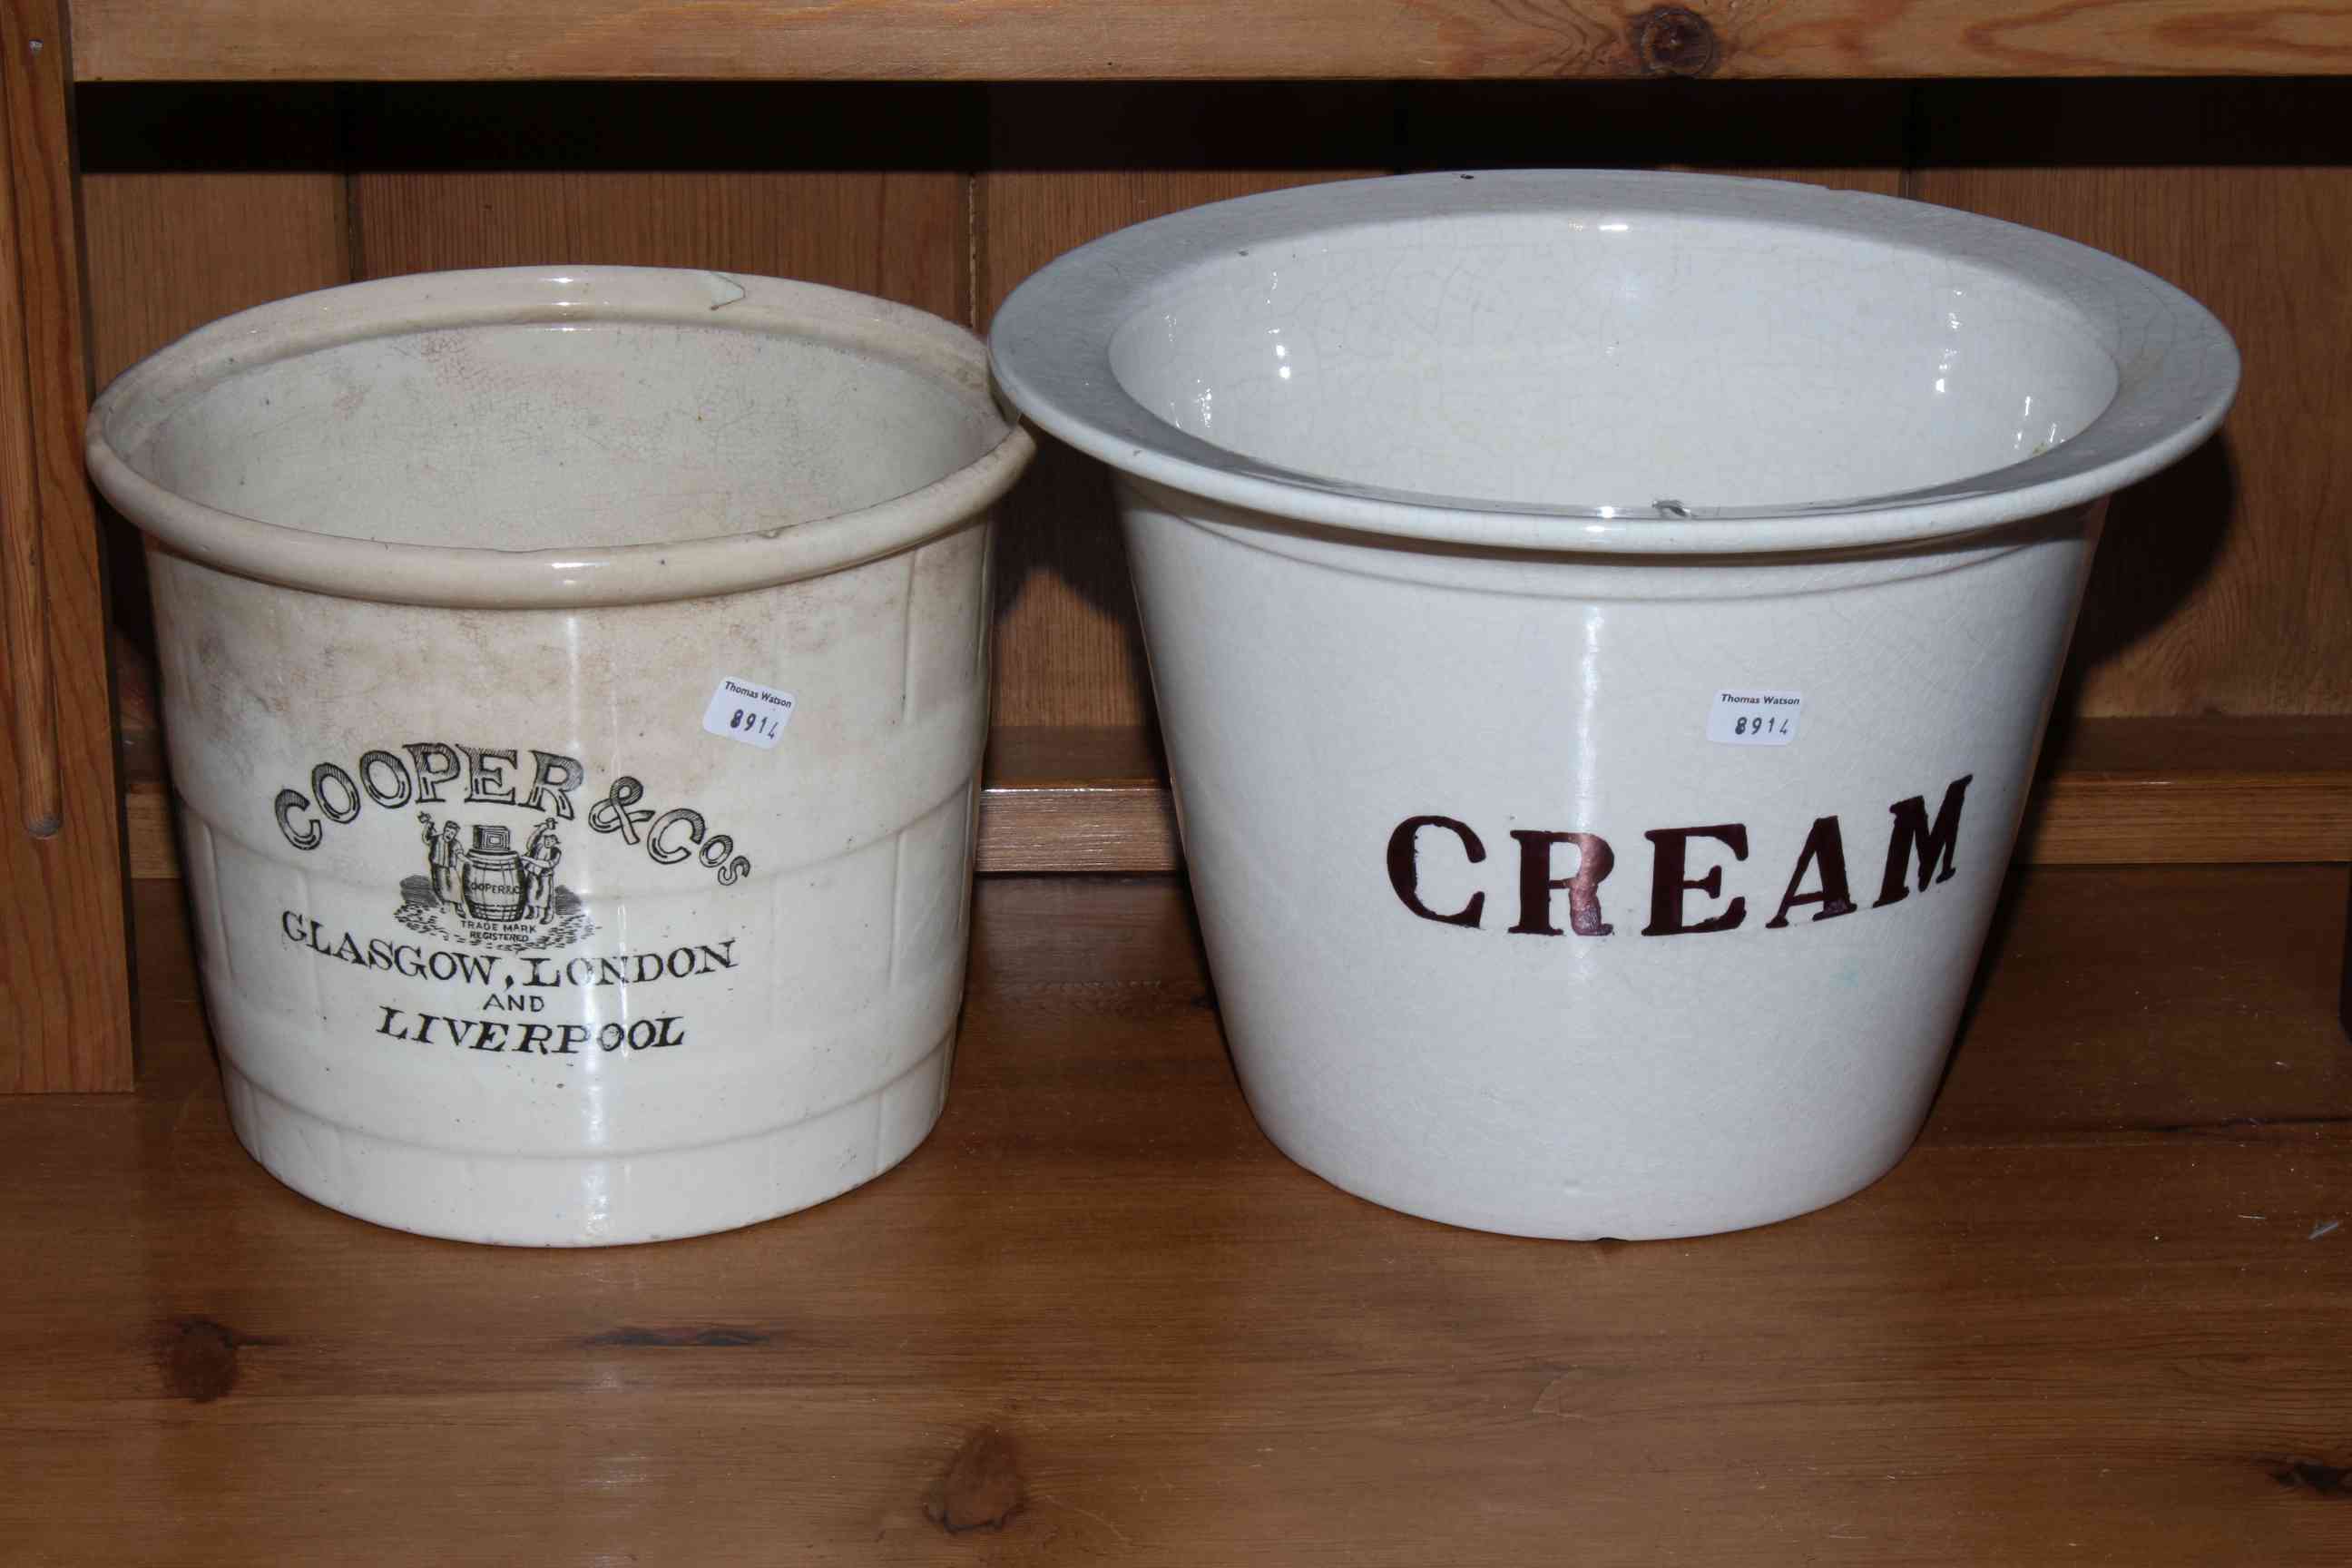 Two shop advert pots 'Cream' and Cooper & Co, Glasgow, Liverpool and London.